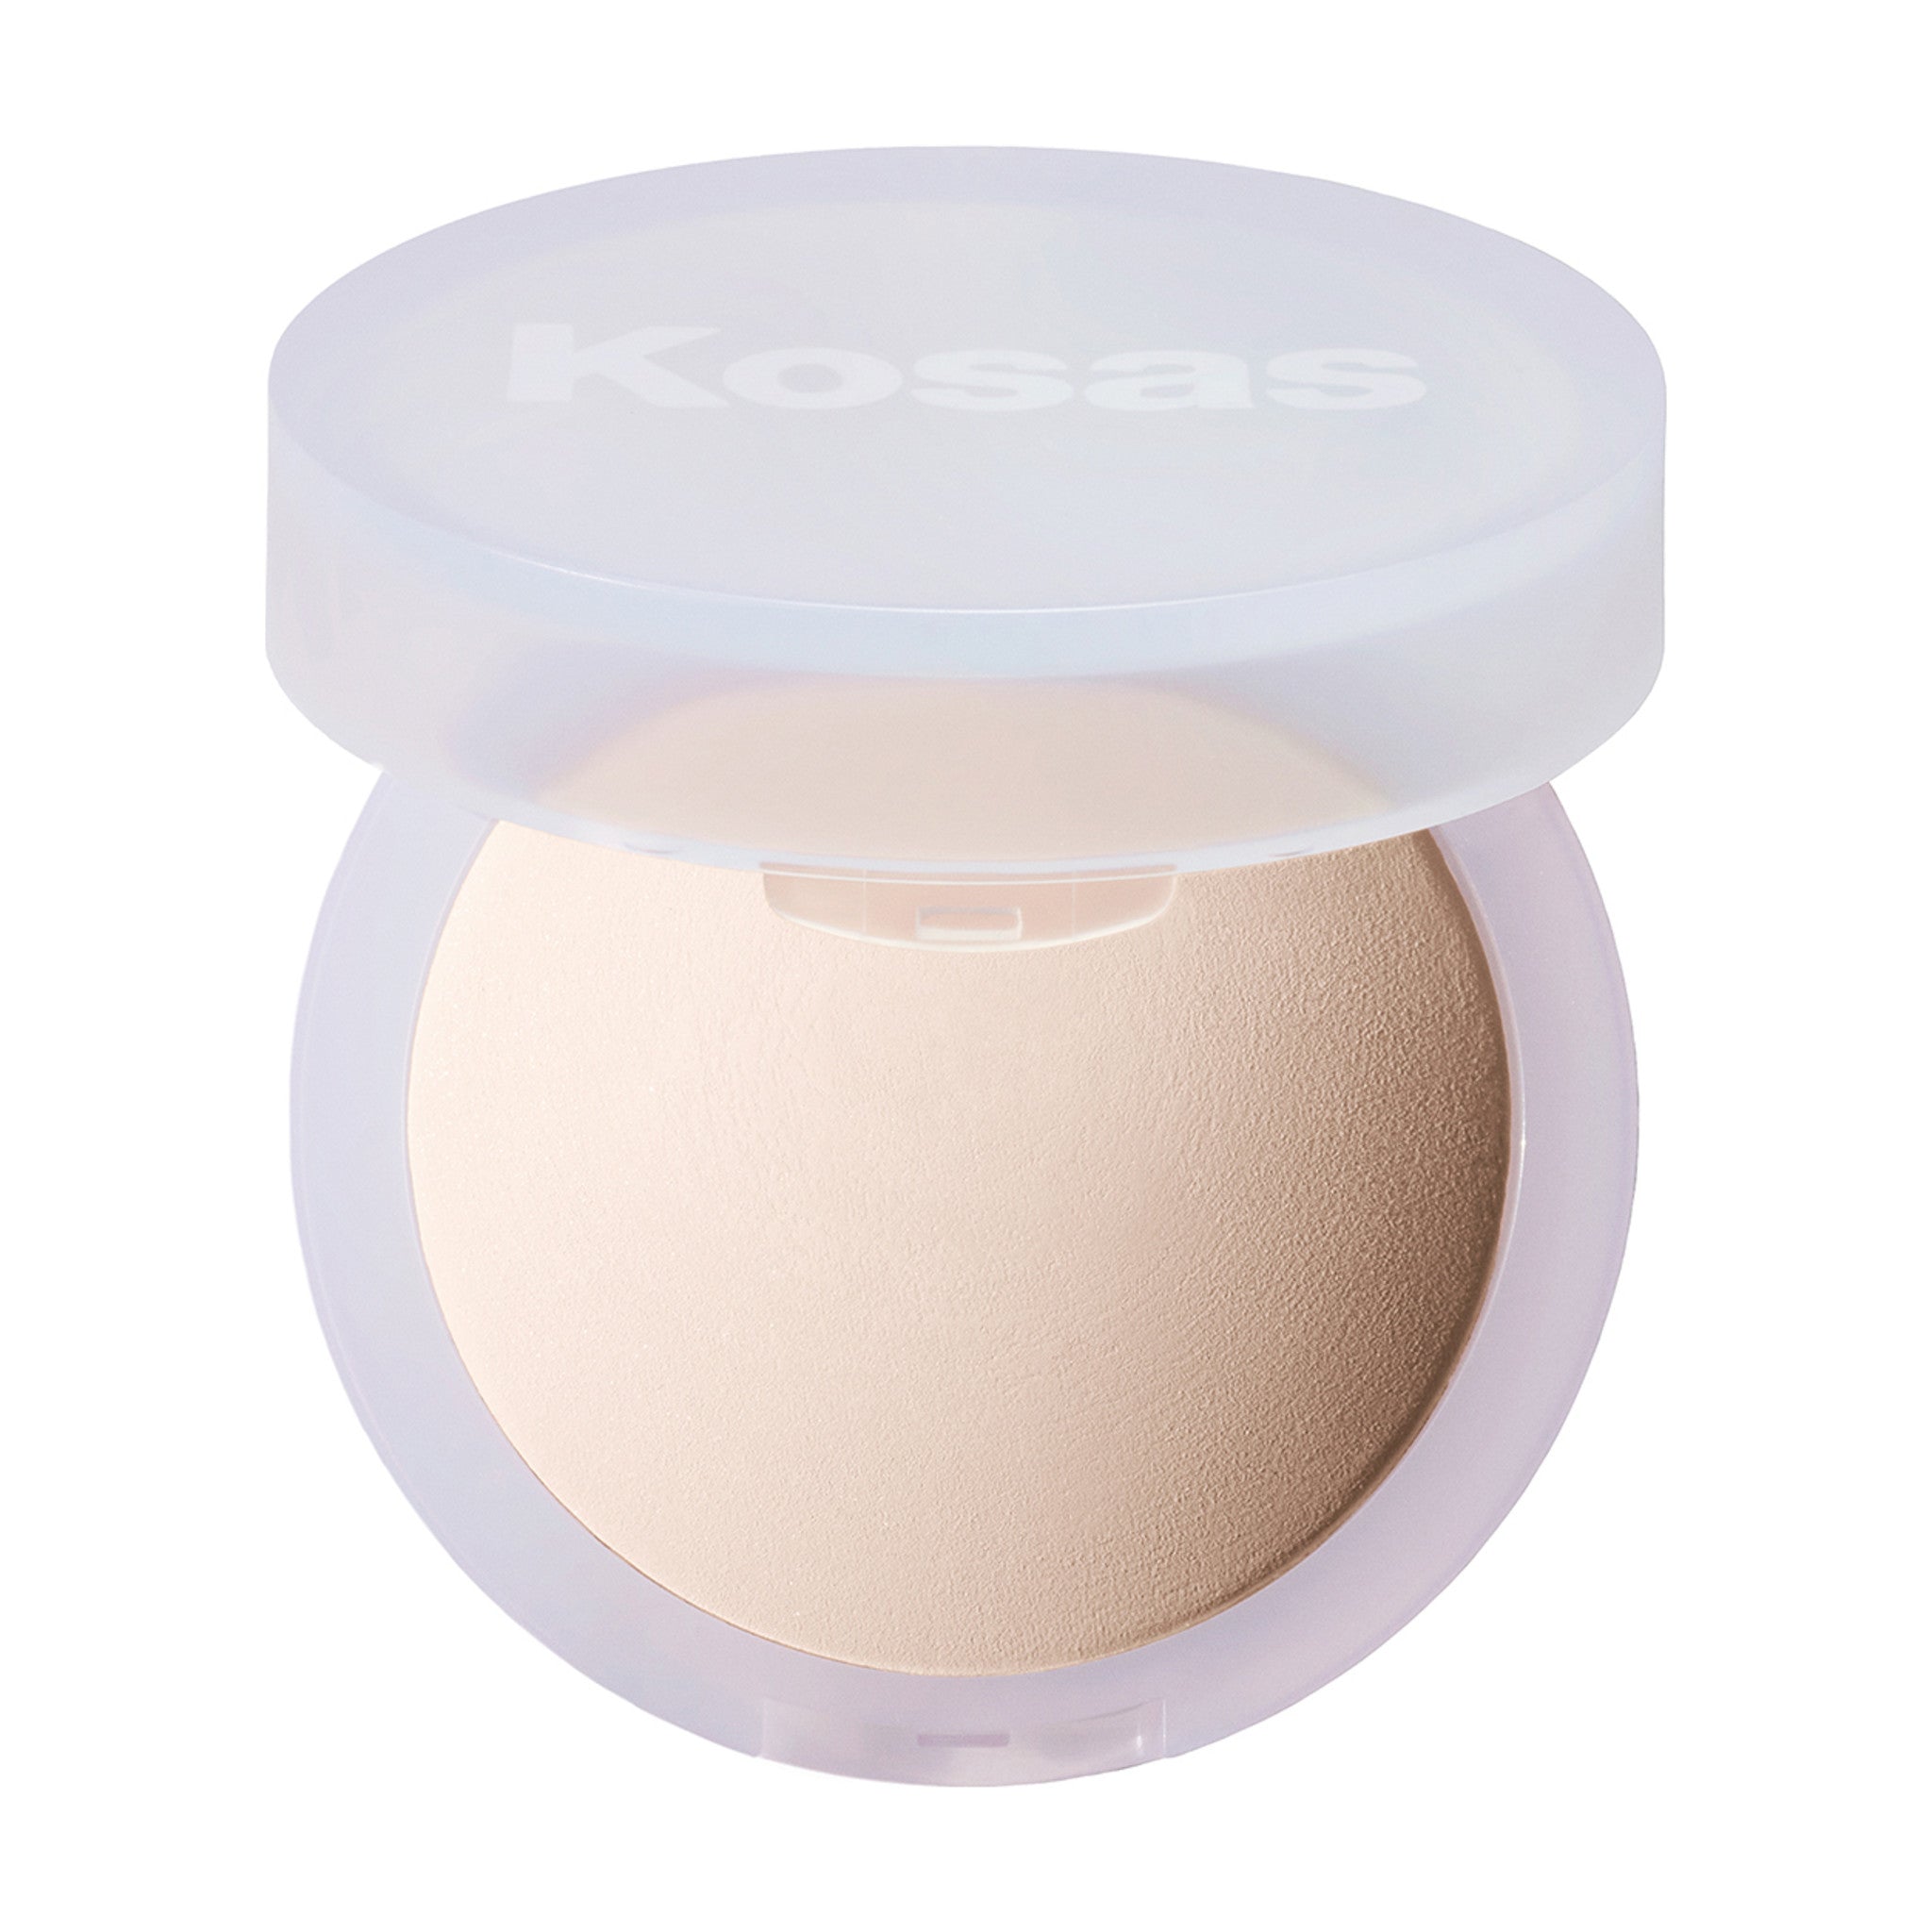 Kosas Cloud Set Baked Setting and Smoothing Powder Color/Shade variant: Airy main image. This product is in the color nude